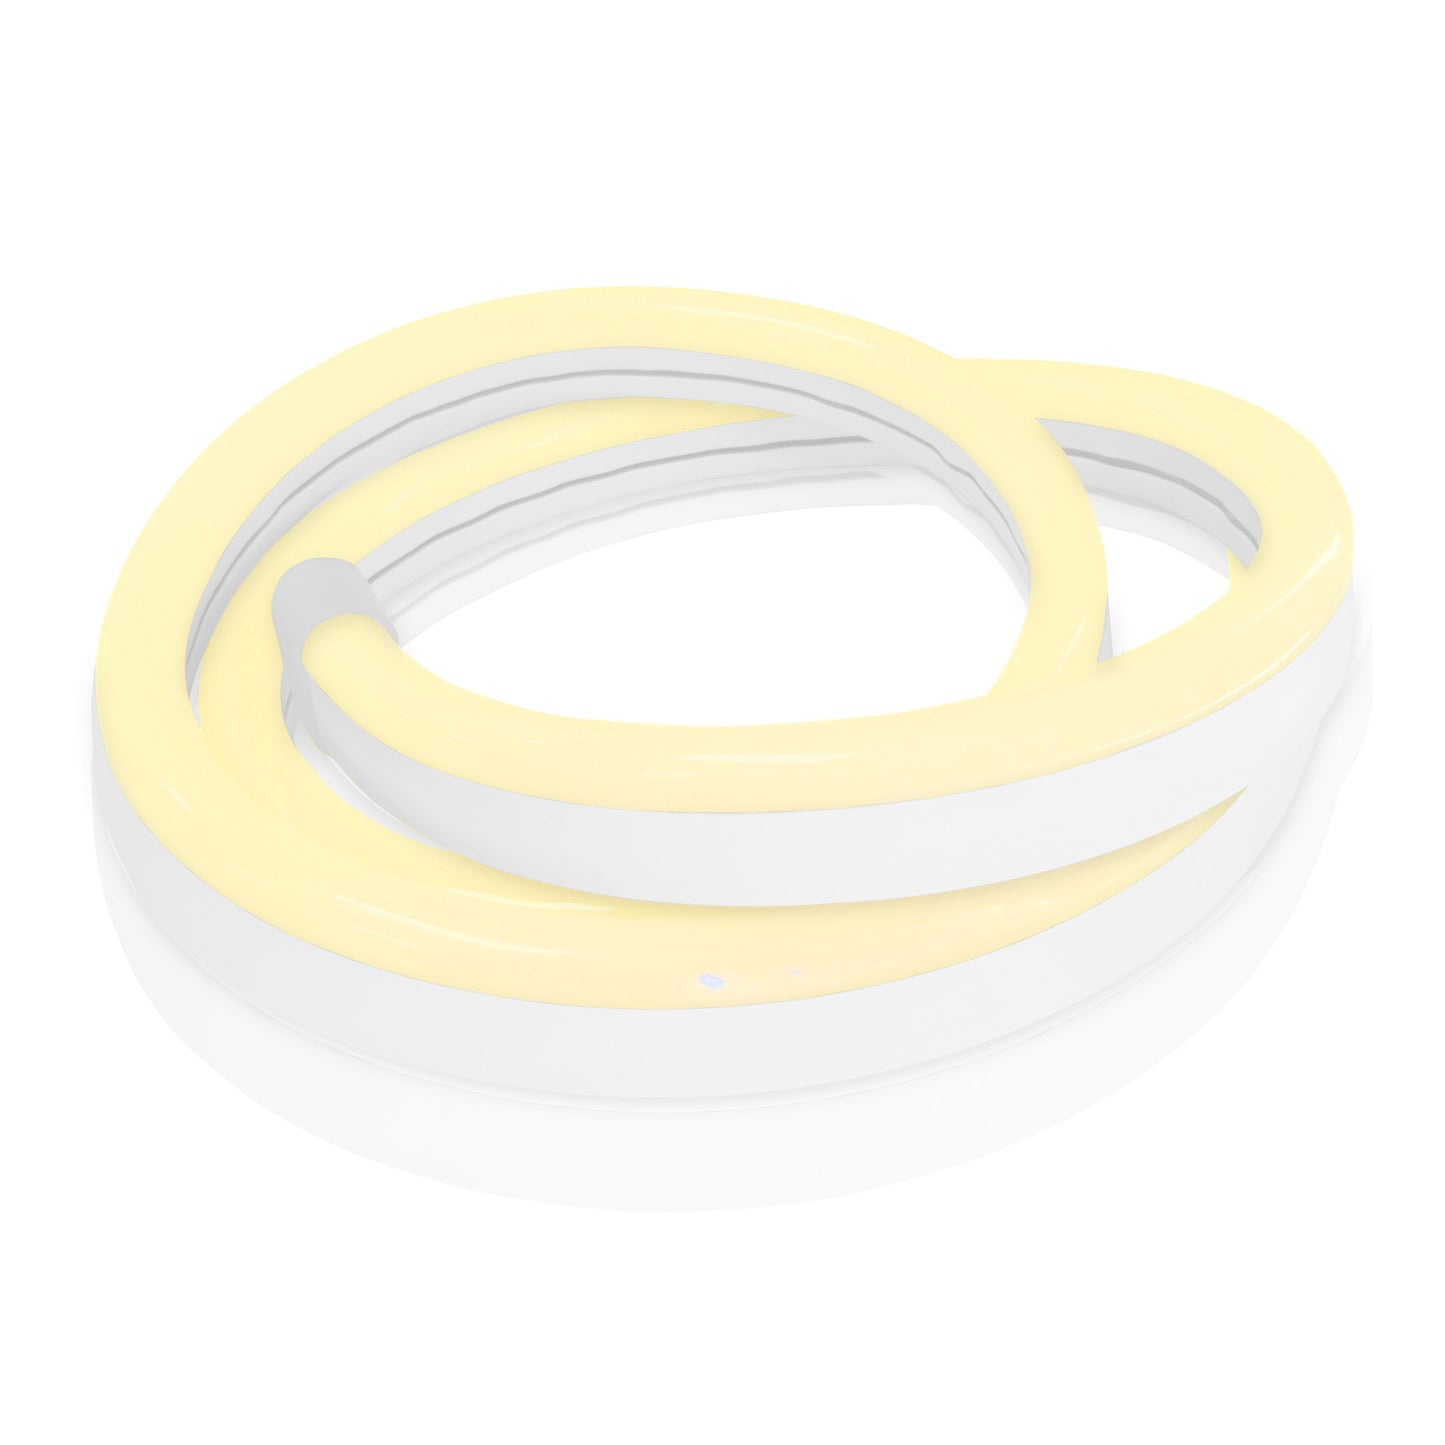 loosely coiled white neon led strip light